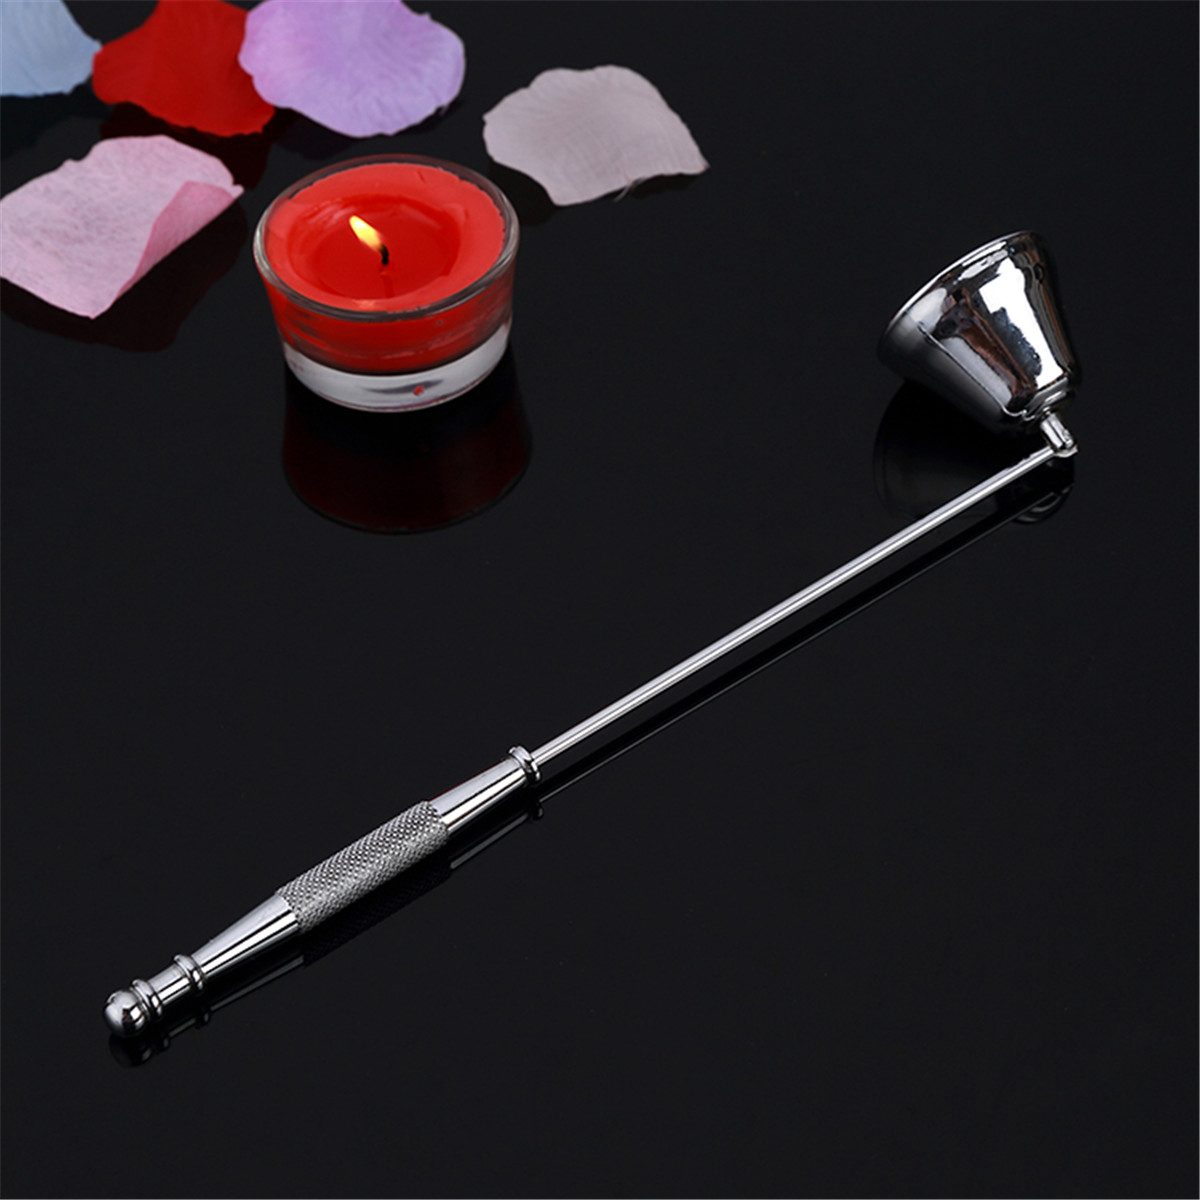 Stainless-Steel-Candle-Snuffer-Silver-Long-Extinguisher-for-Tea-Light-Candle-Tool-1252840-4